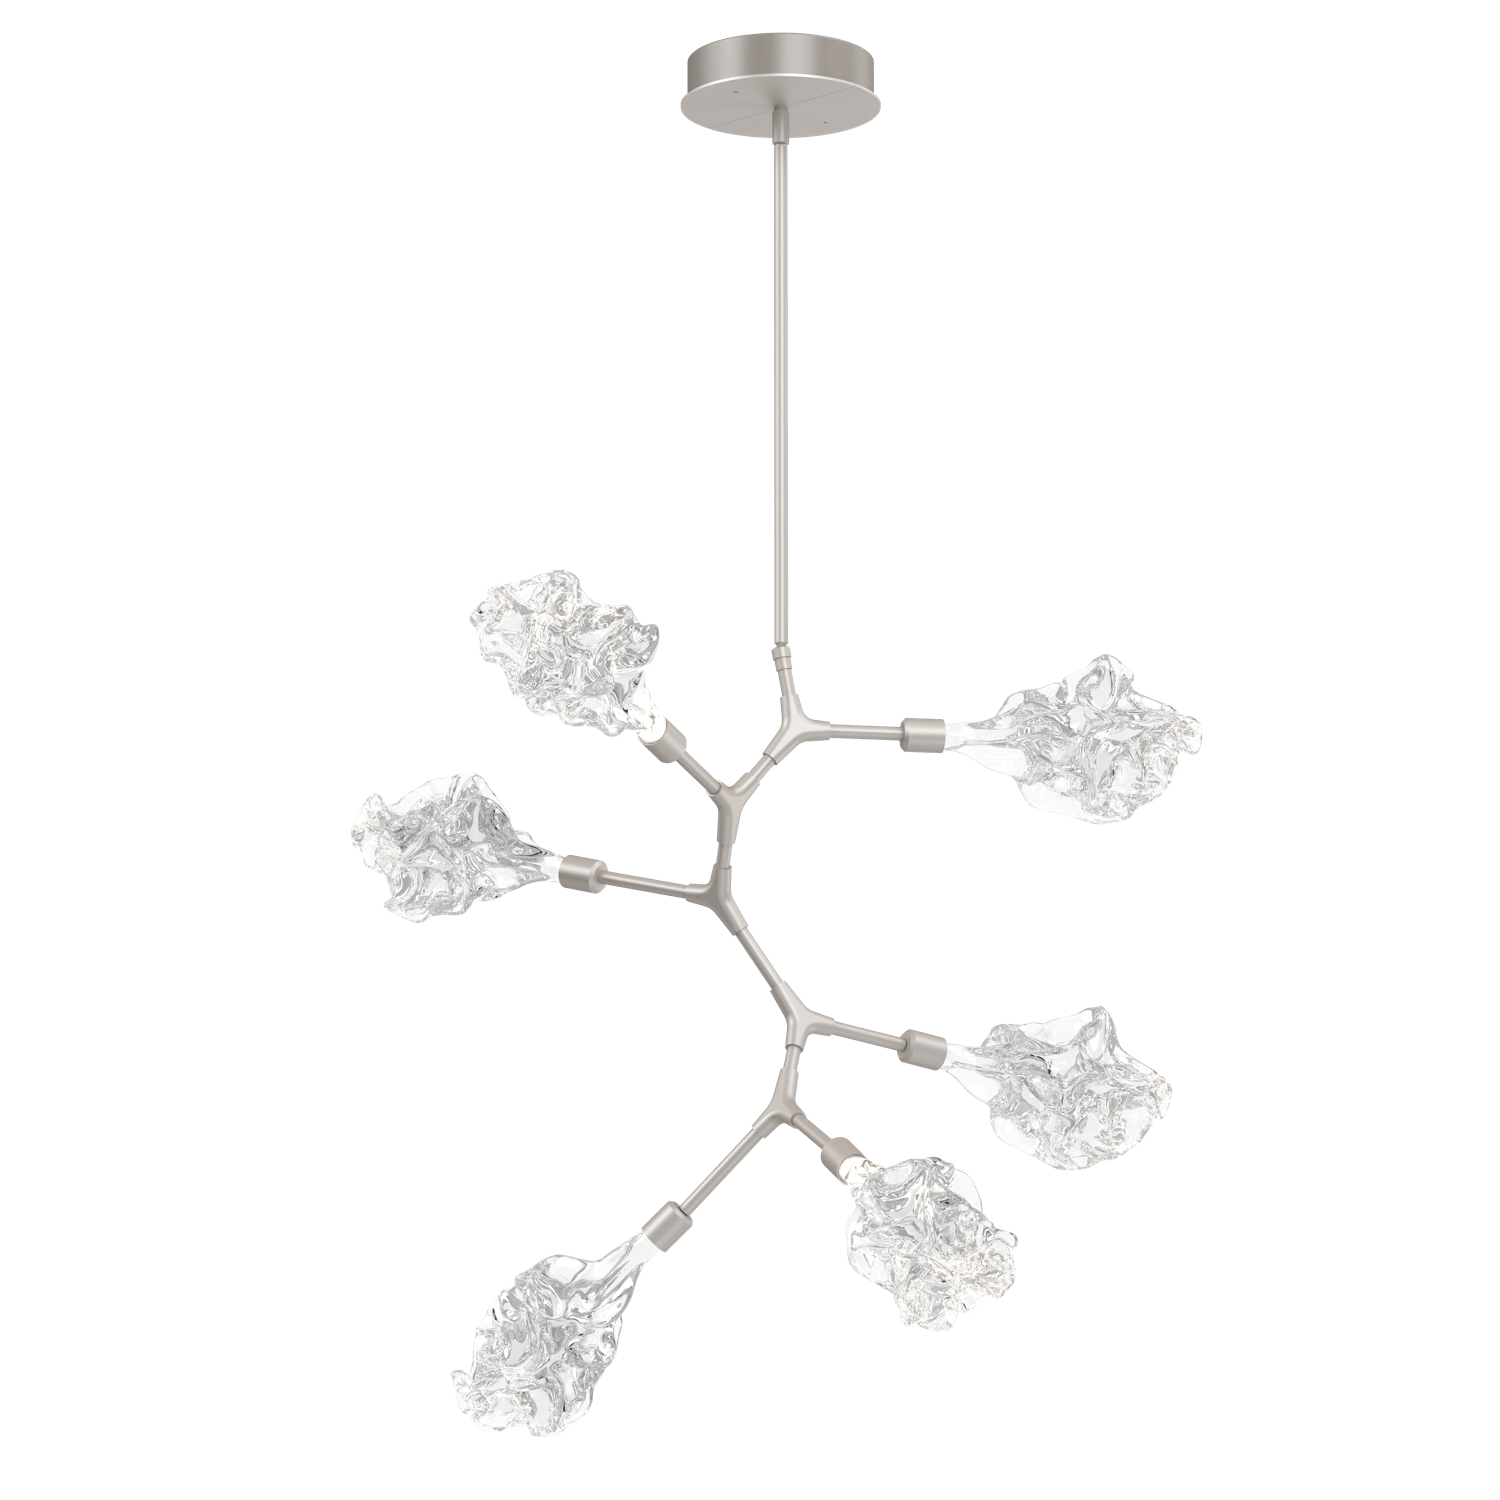 CHB0059-VA-BS-Hammerton-Studio-Blossom-6-light-organic-vine-chandelier-with-metallic-beige-silver-finish-and-clear-handblown-crystal-glass-shades-and-LED-lamping